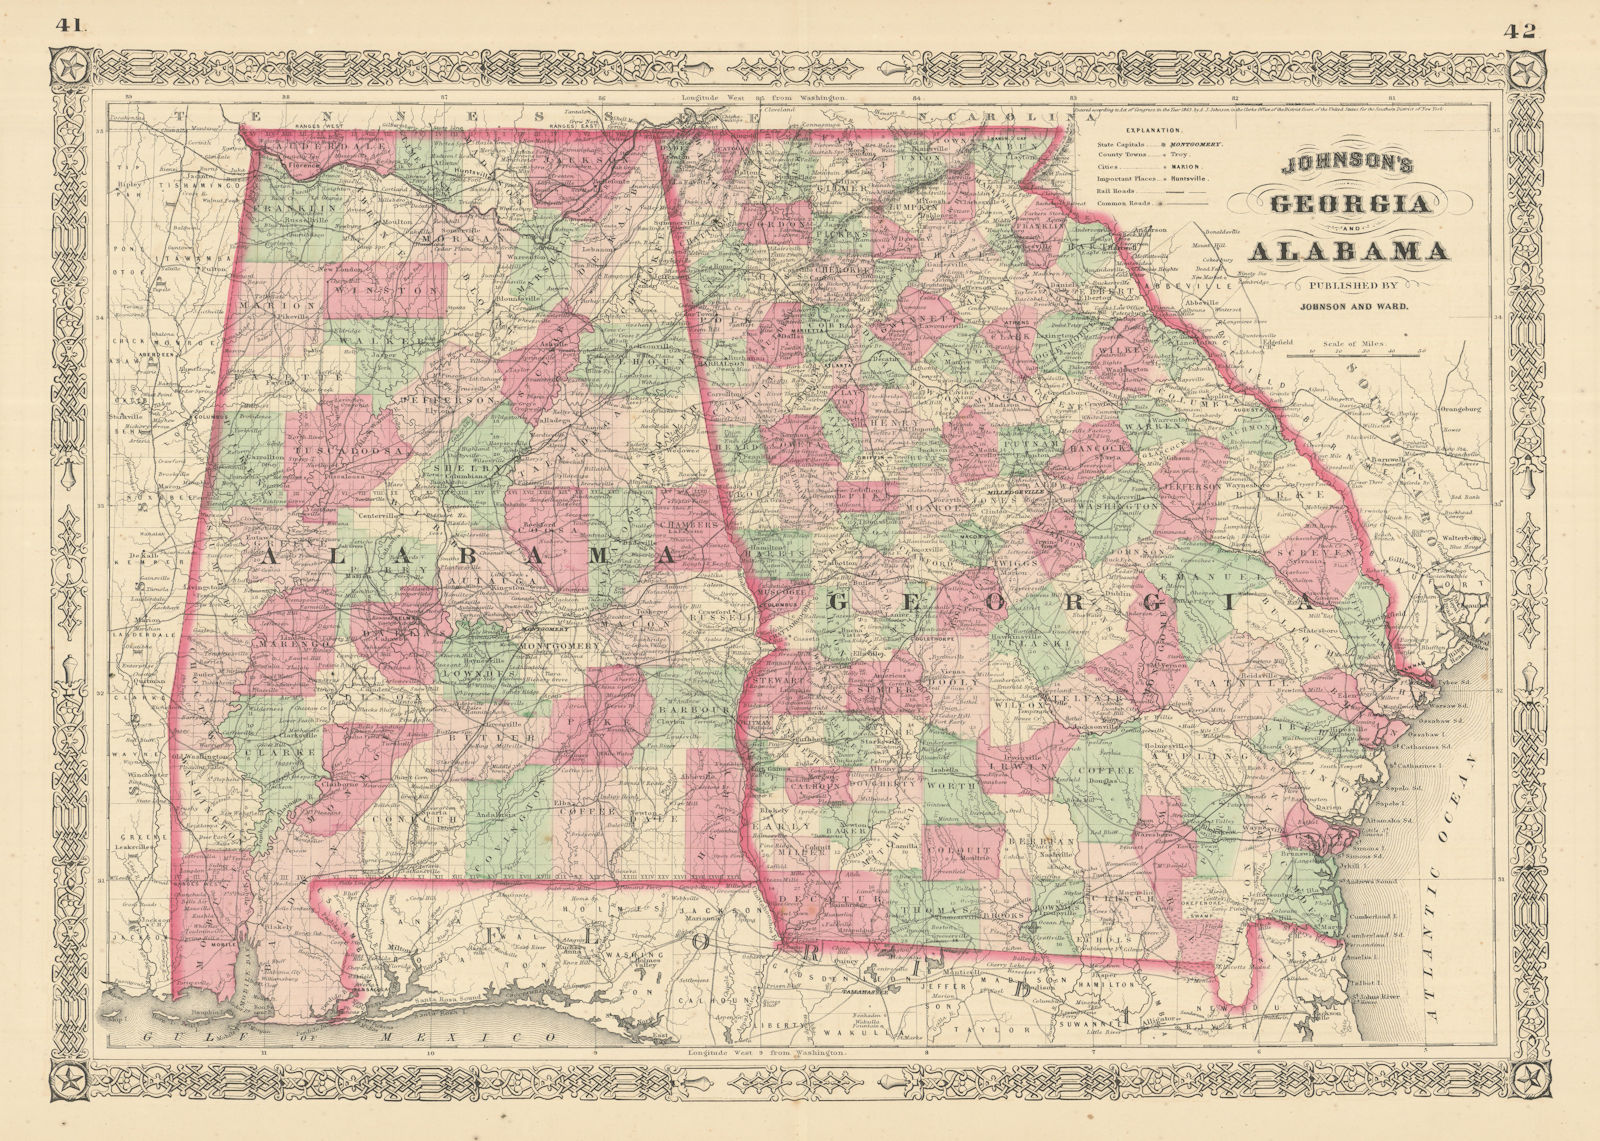 Associate Product Johnson's Georgia & Alabama. US state map showing counties 1866 old